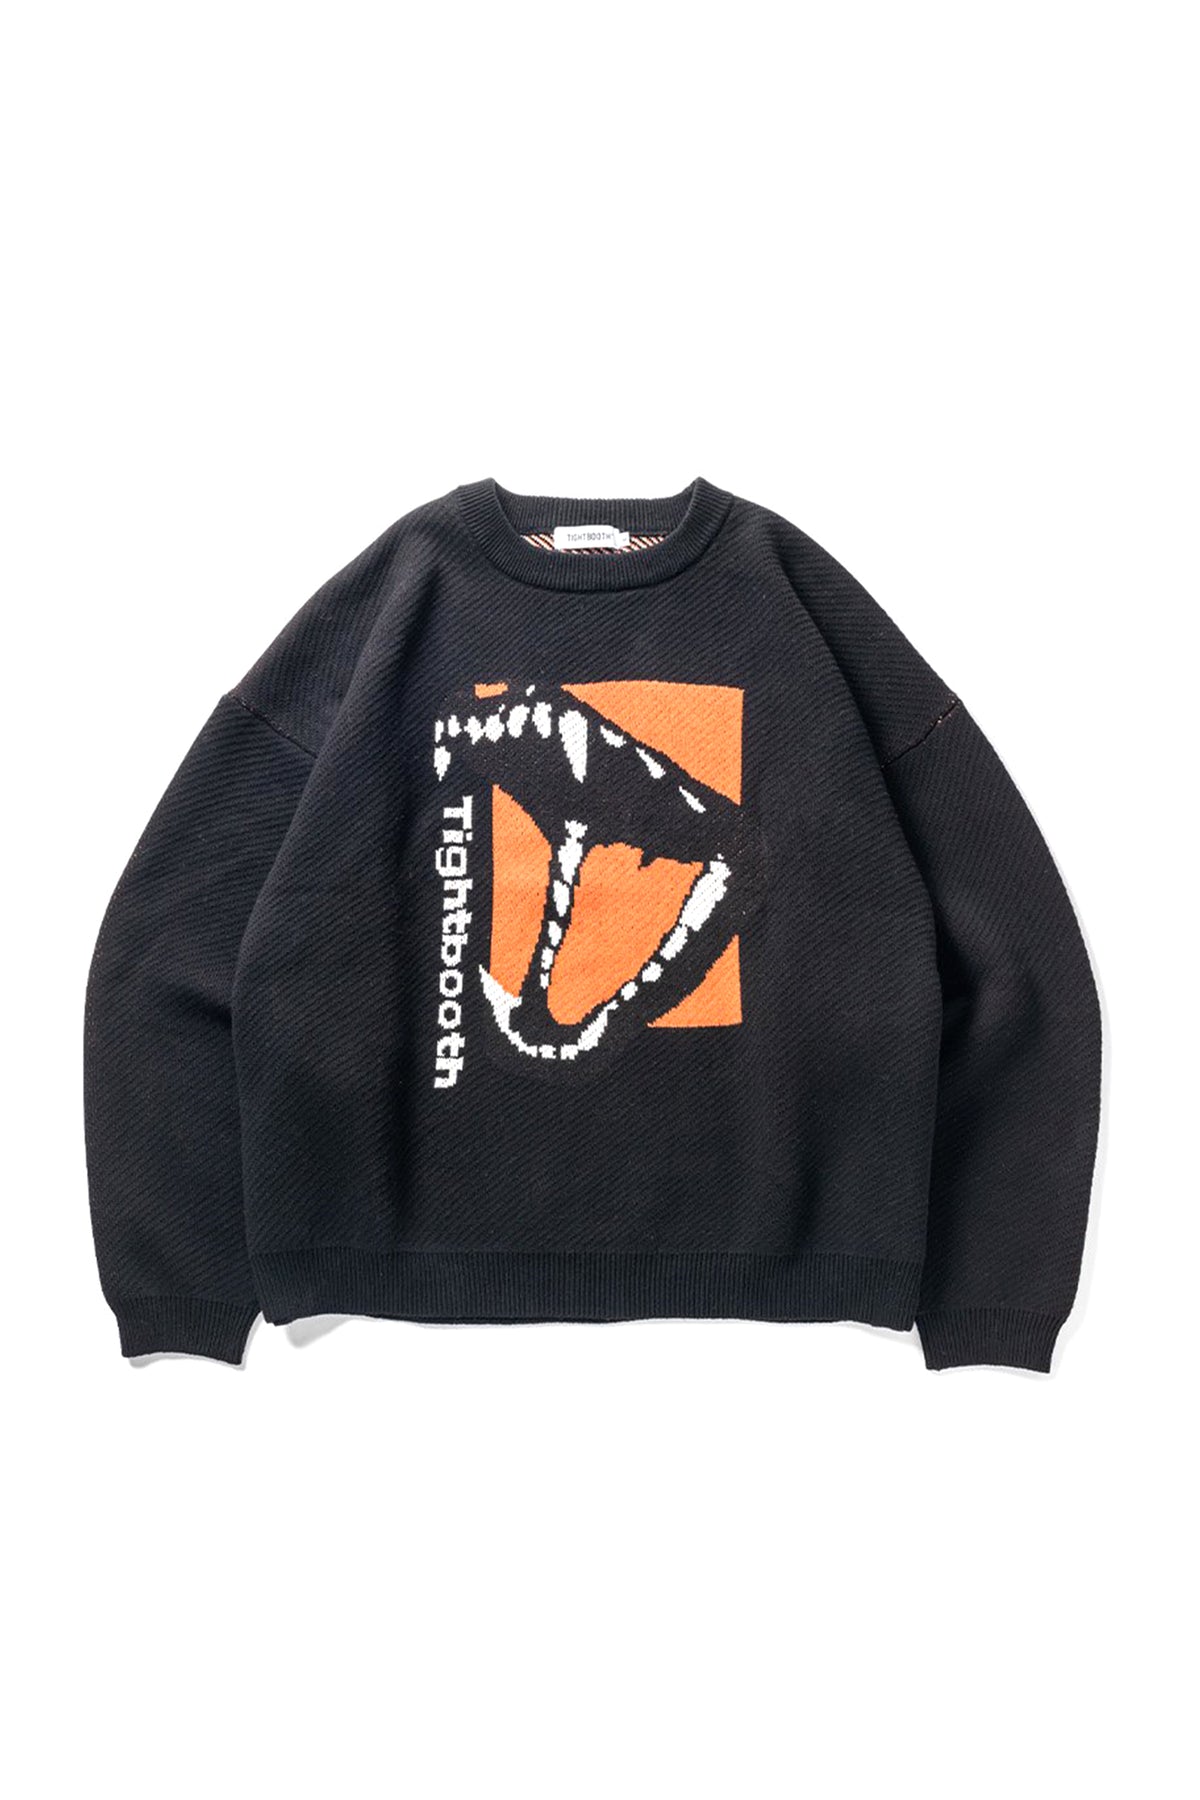 TIGHTBOOTH BITE KNIT SWEATER / BLK